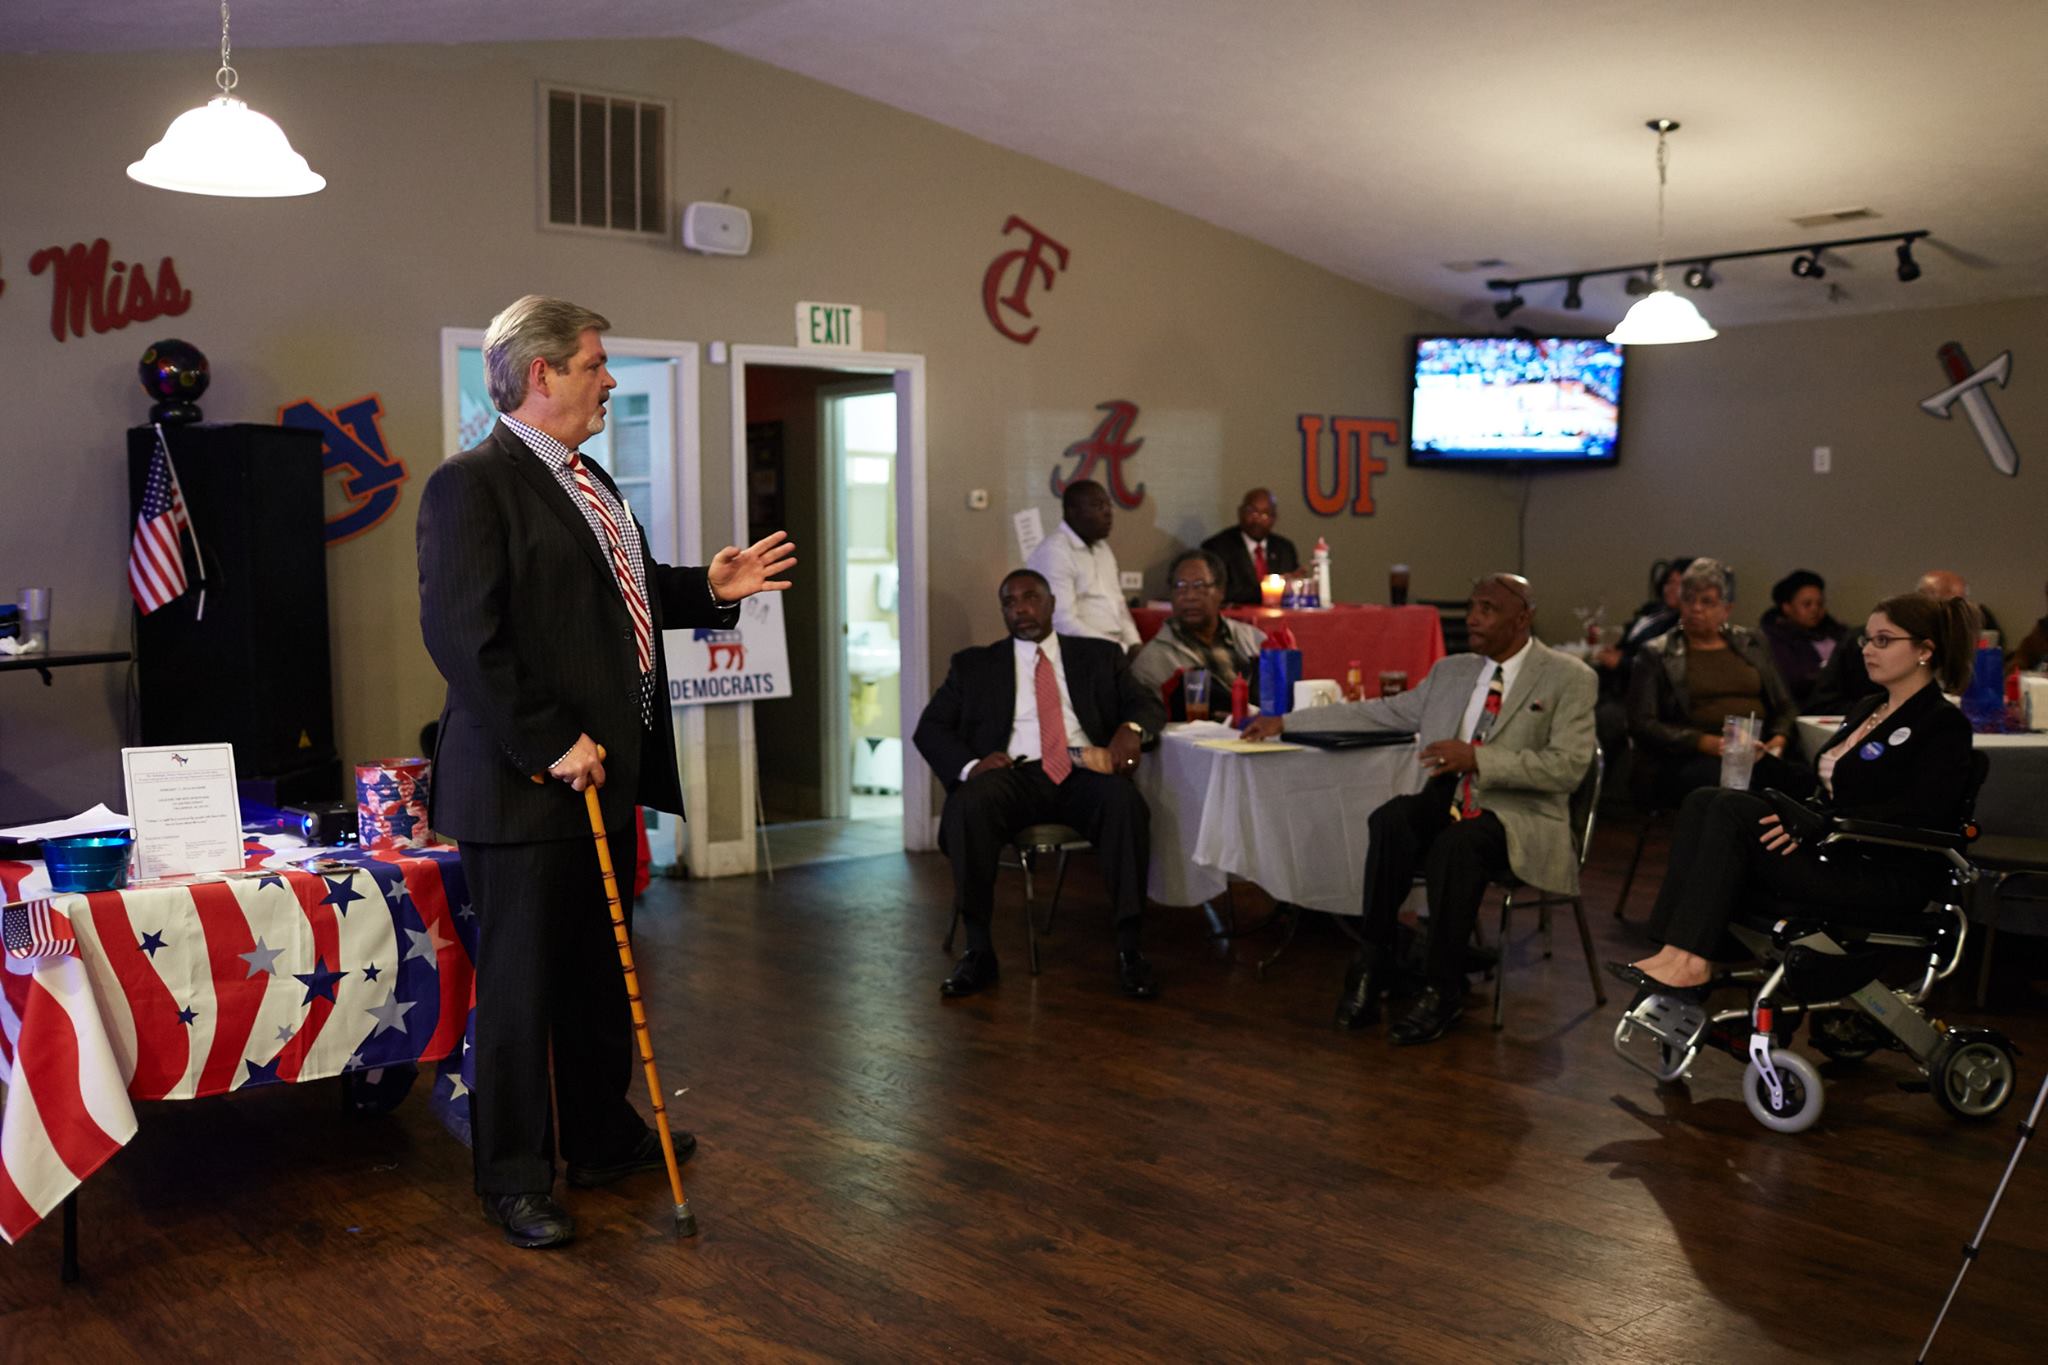 Ron Crumpton speaking at a campaign event. He is using a cane and there is a woman in a wheelchair in the audience.